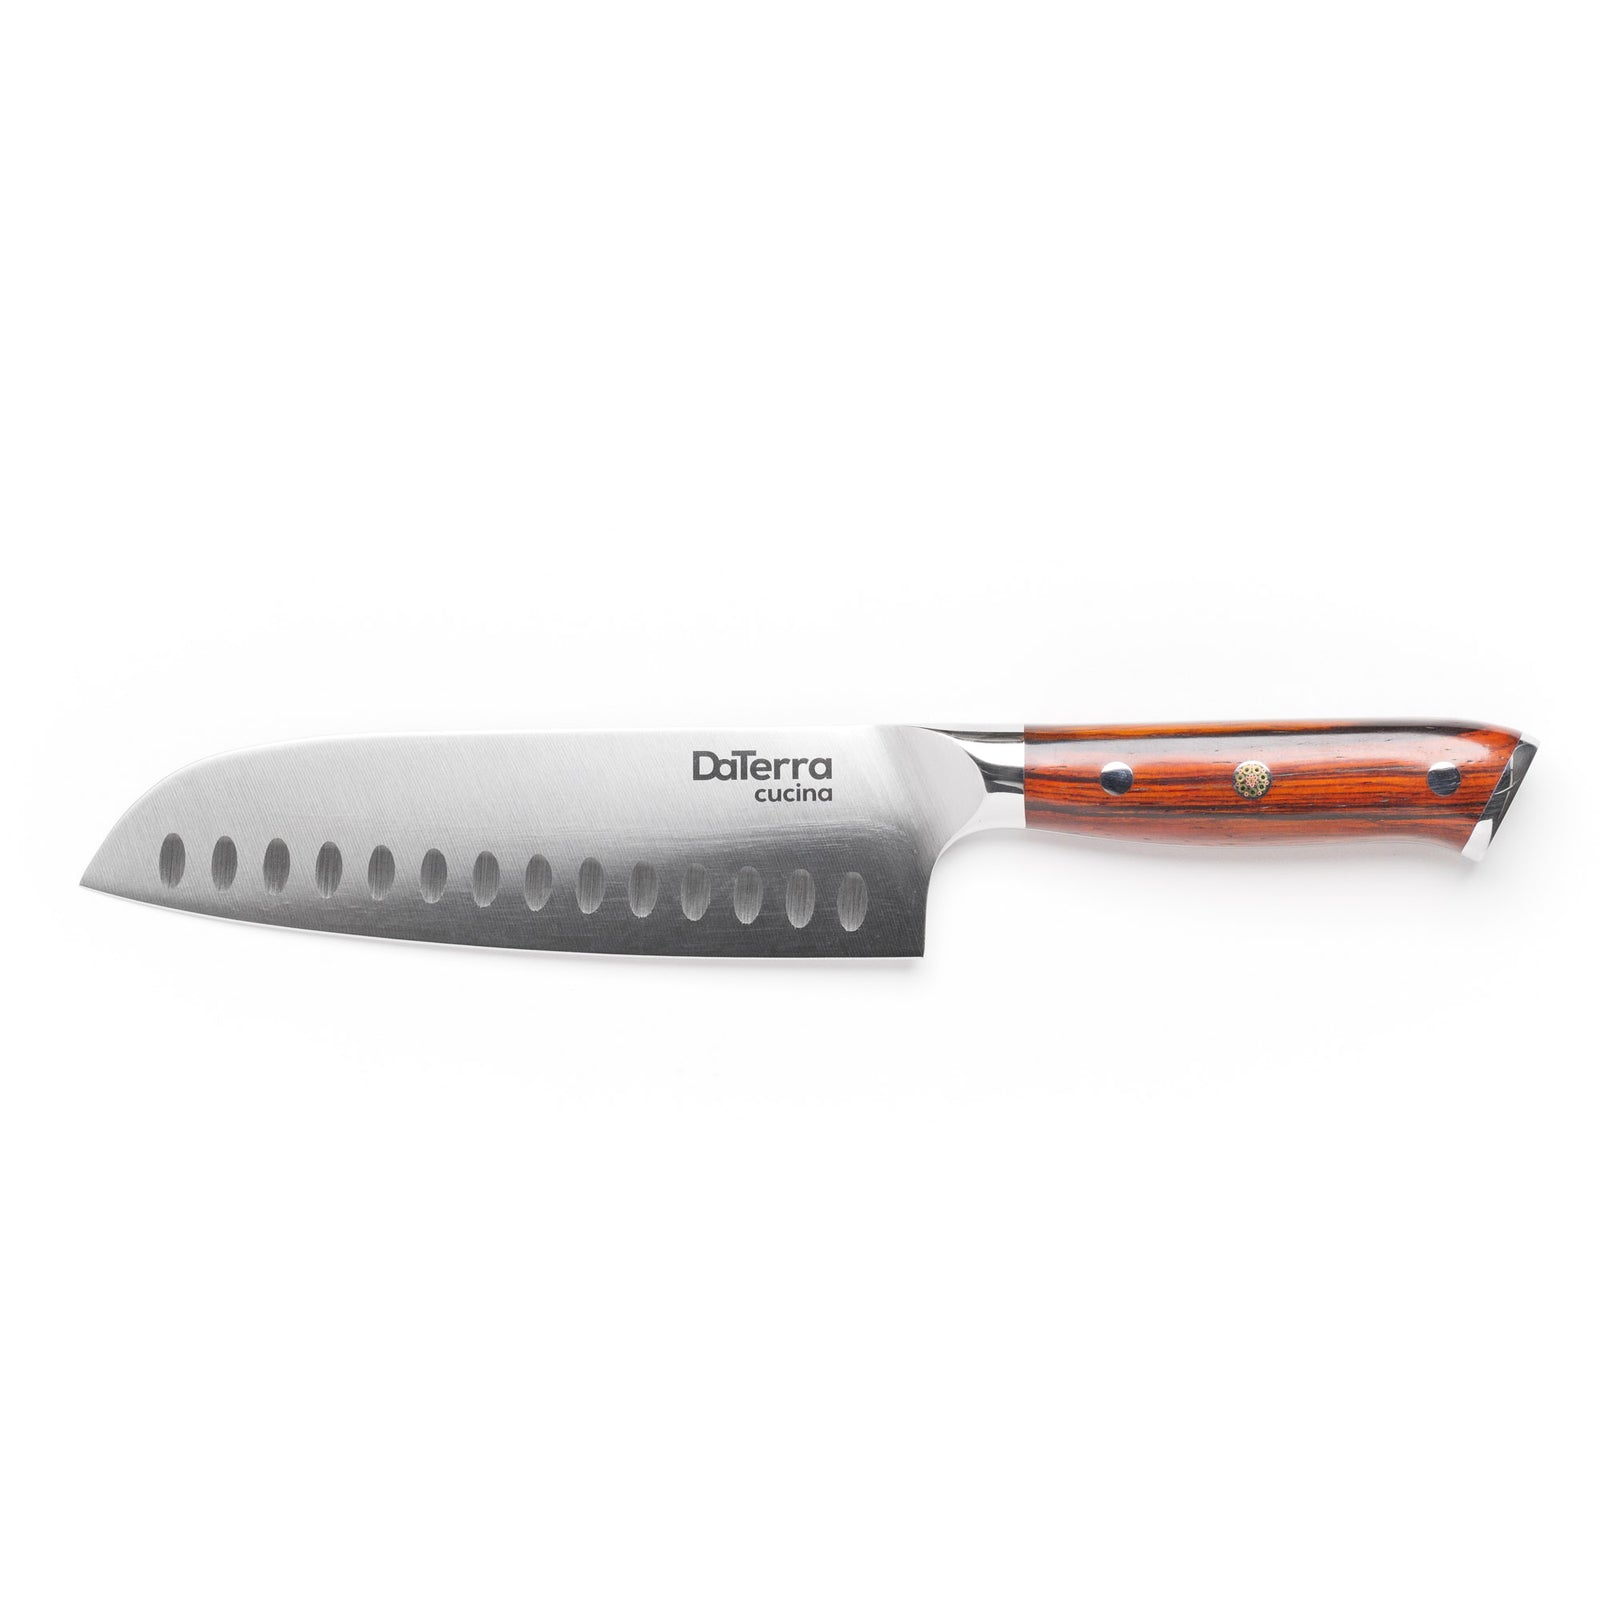 The Ultimate Edge Knife - The Sharpest Knife on the Planet! by